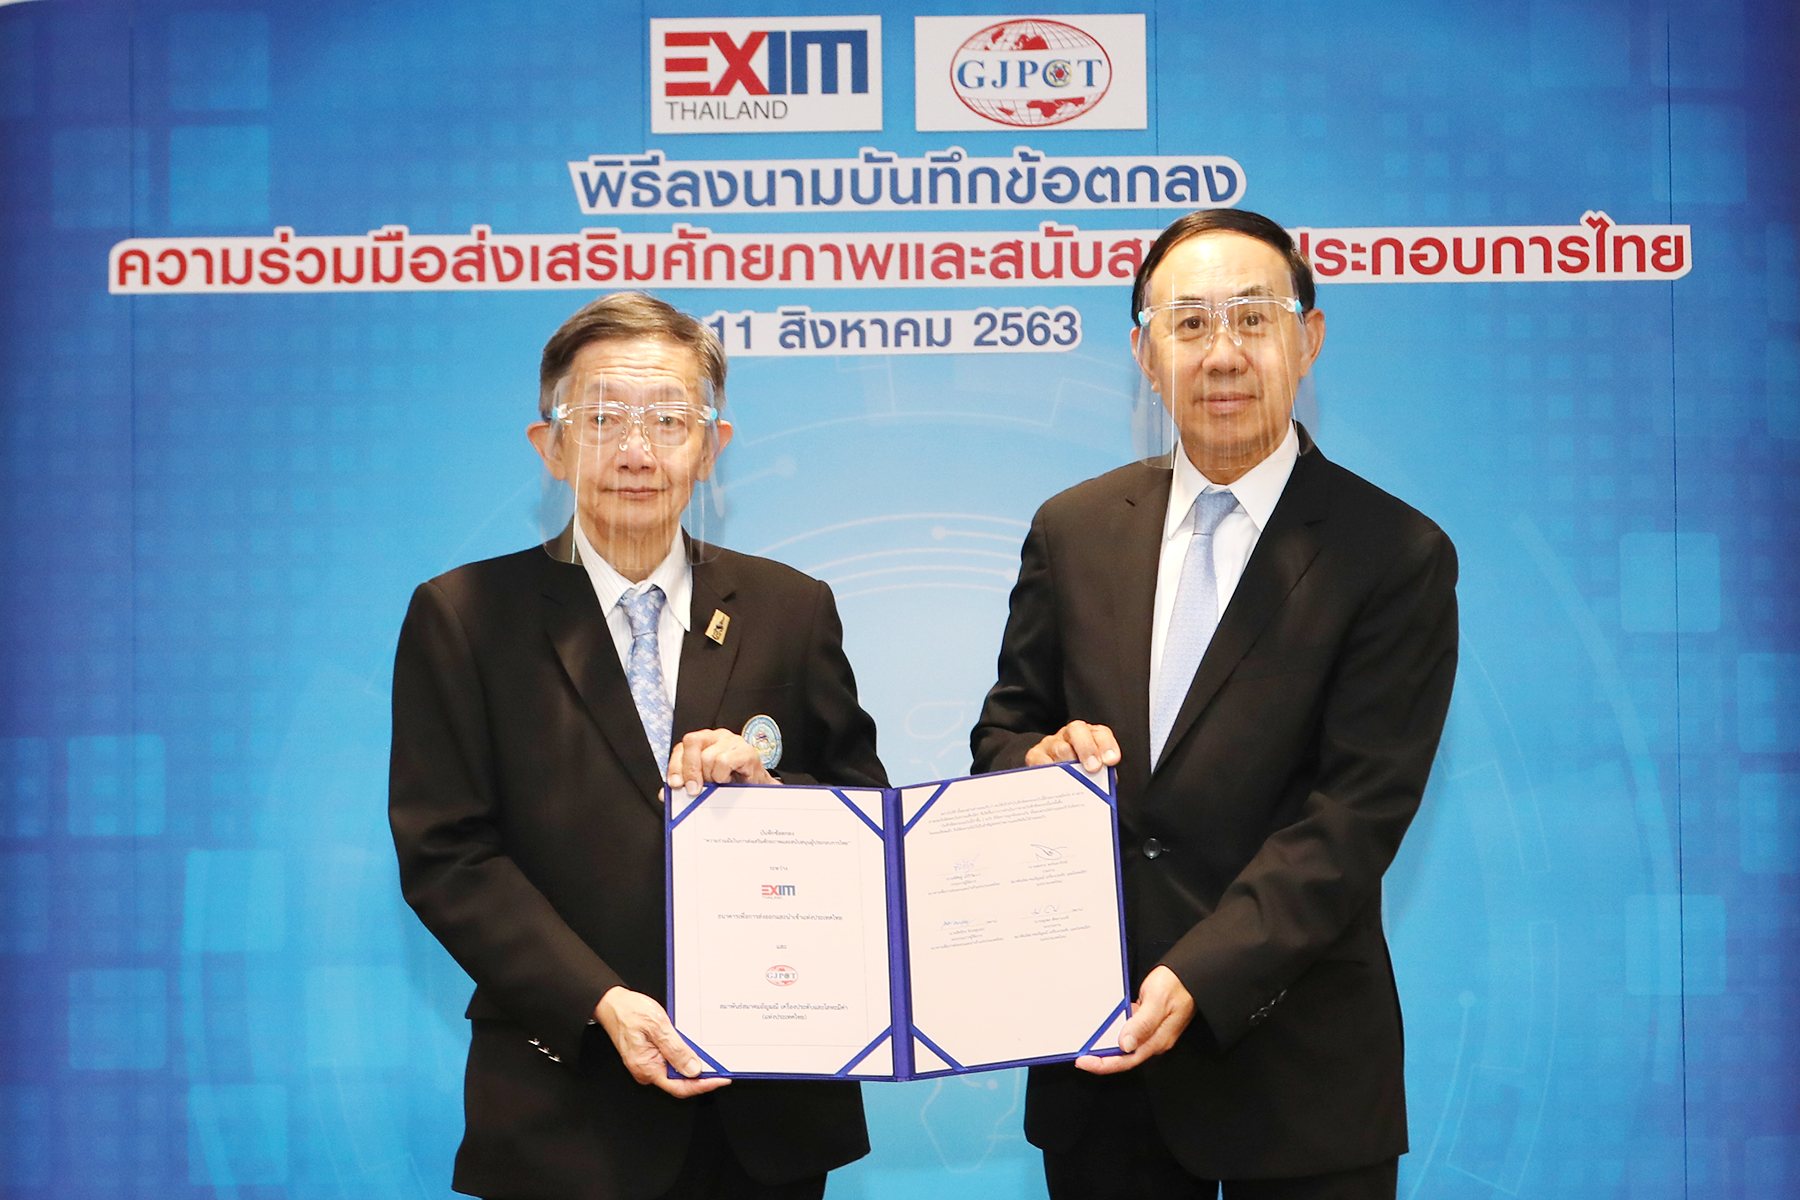 EXIM Thailand Joins Hands with GJPCT to Promote and Enhance Thai Gems and Jewelry Entrepreneurs’ Competitiveness in the Global Market